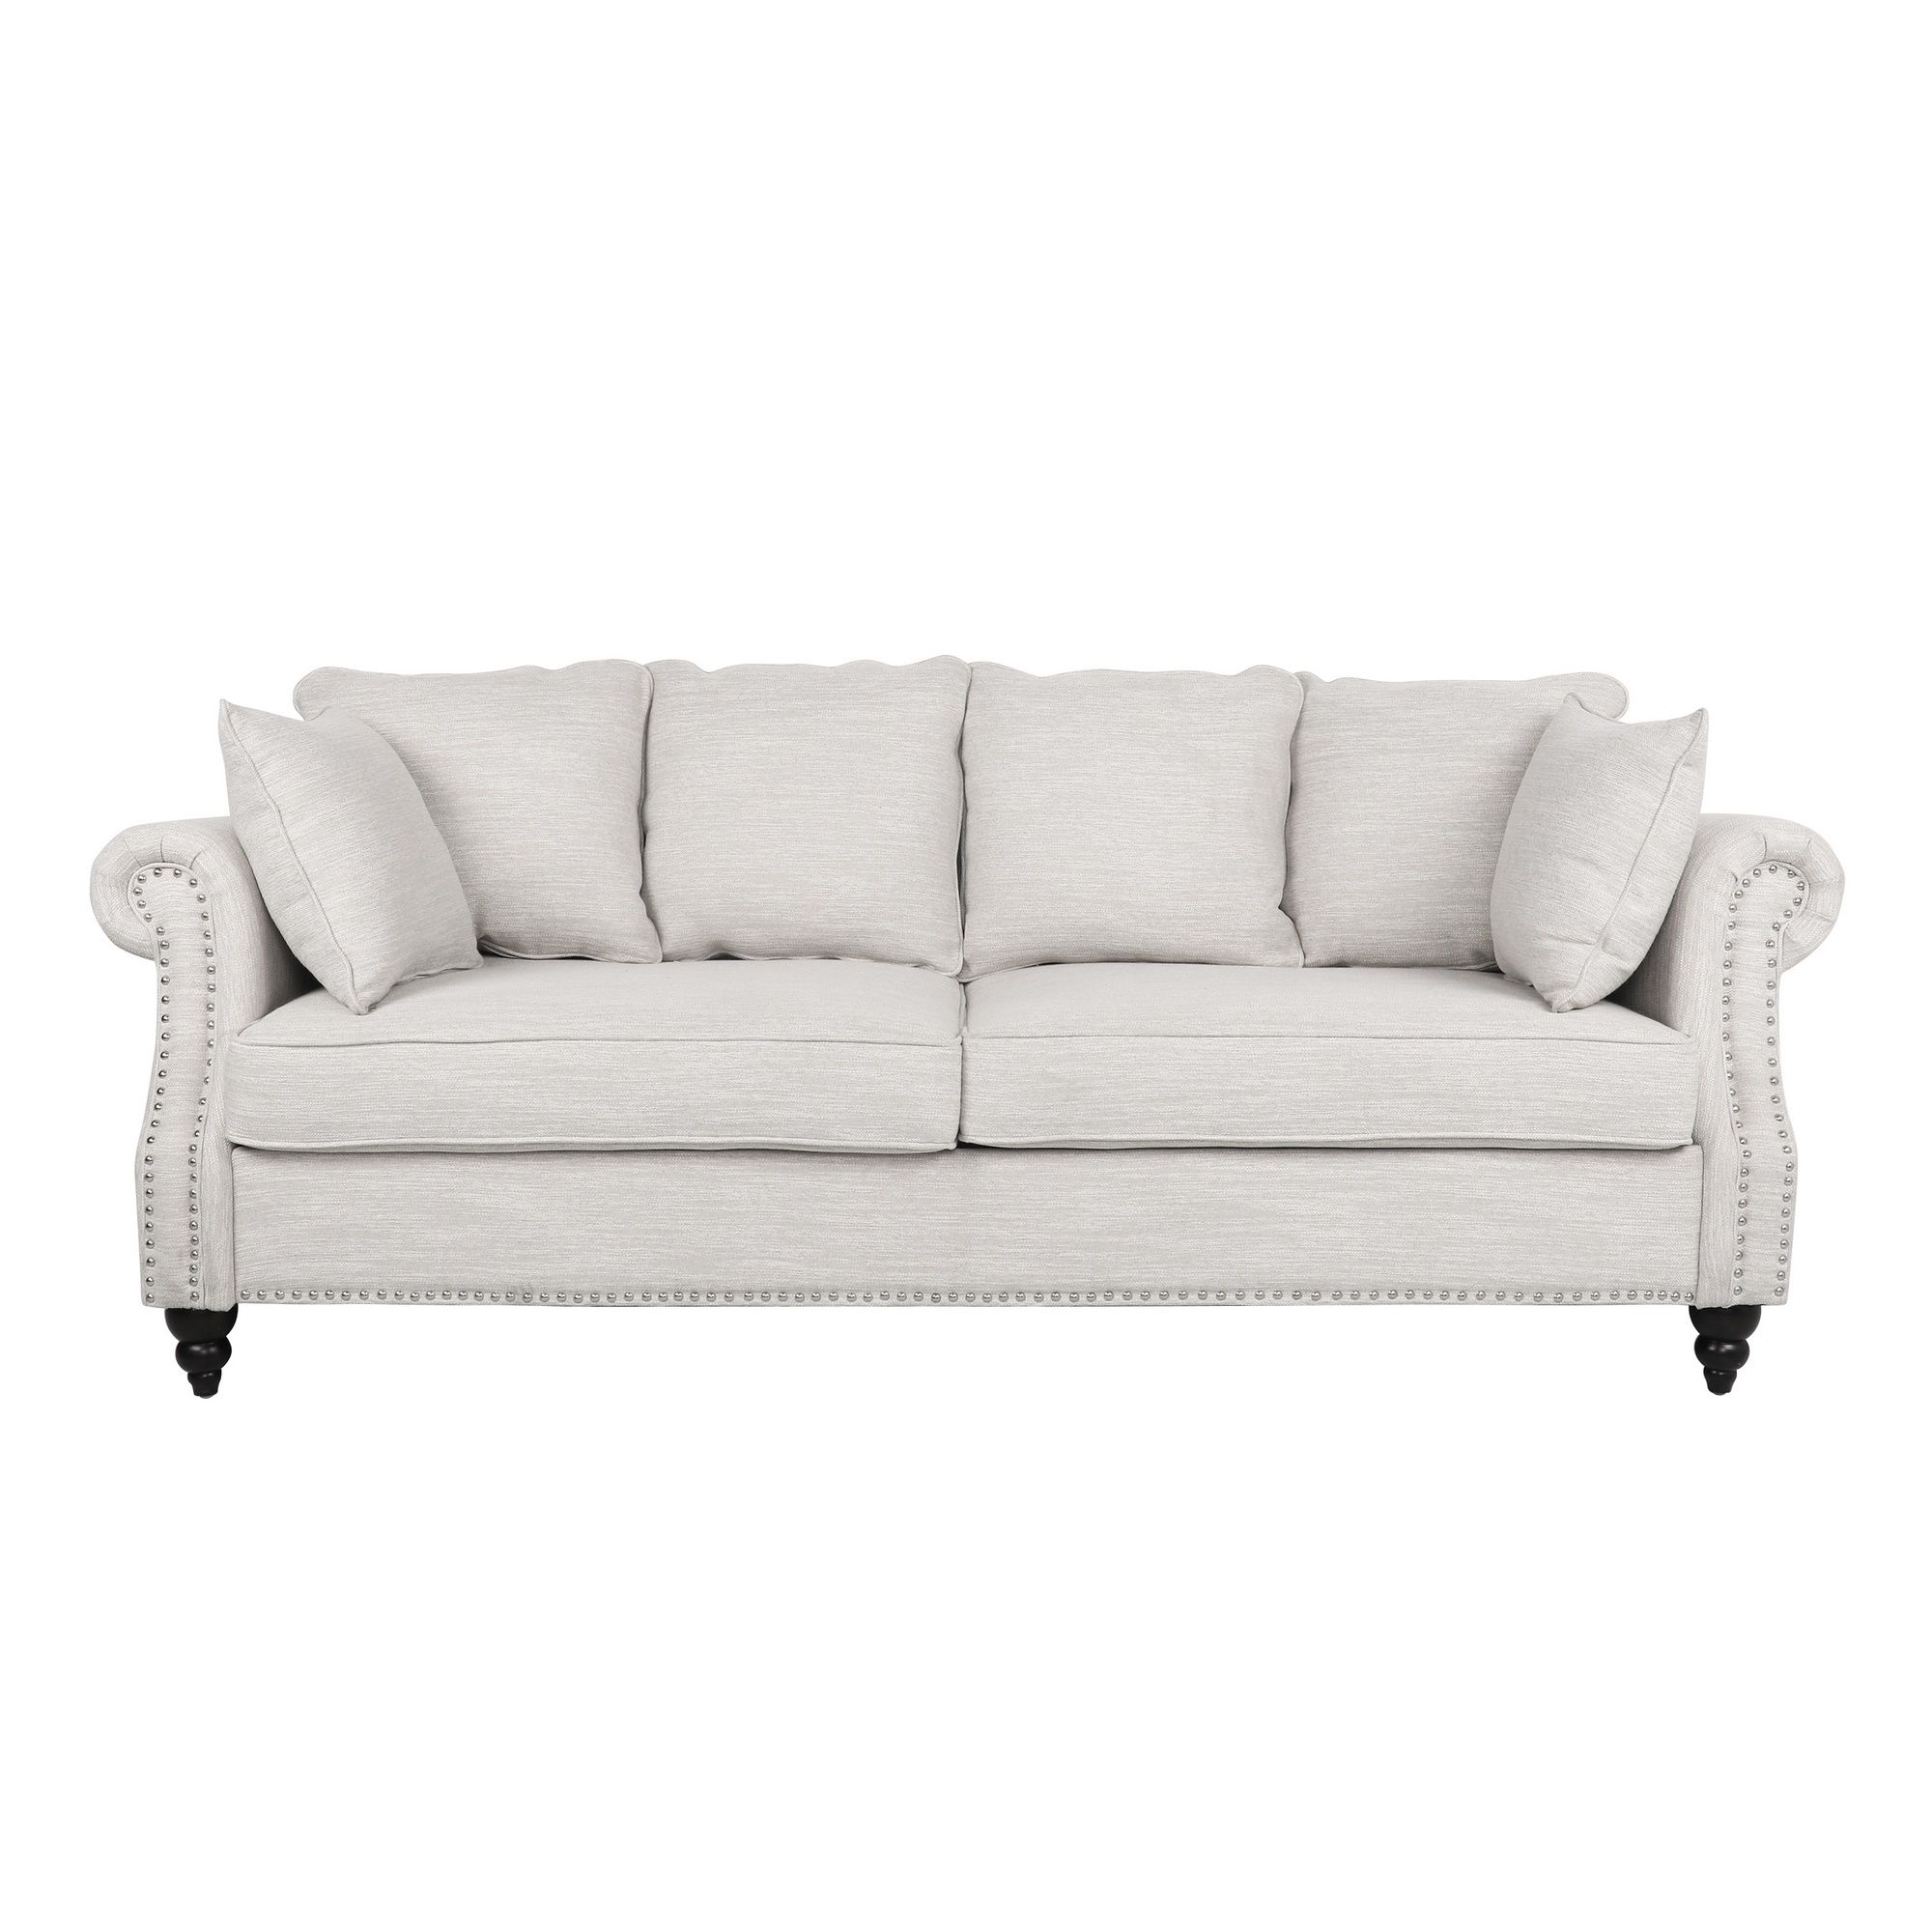 Manbow Contemporary Fabric Pillowback 3 Seater Sofa With Nailhead Trim,  Beige And Dark Brown With Sofas With Pillowback Wood Bases (Photo 15 of 15)